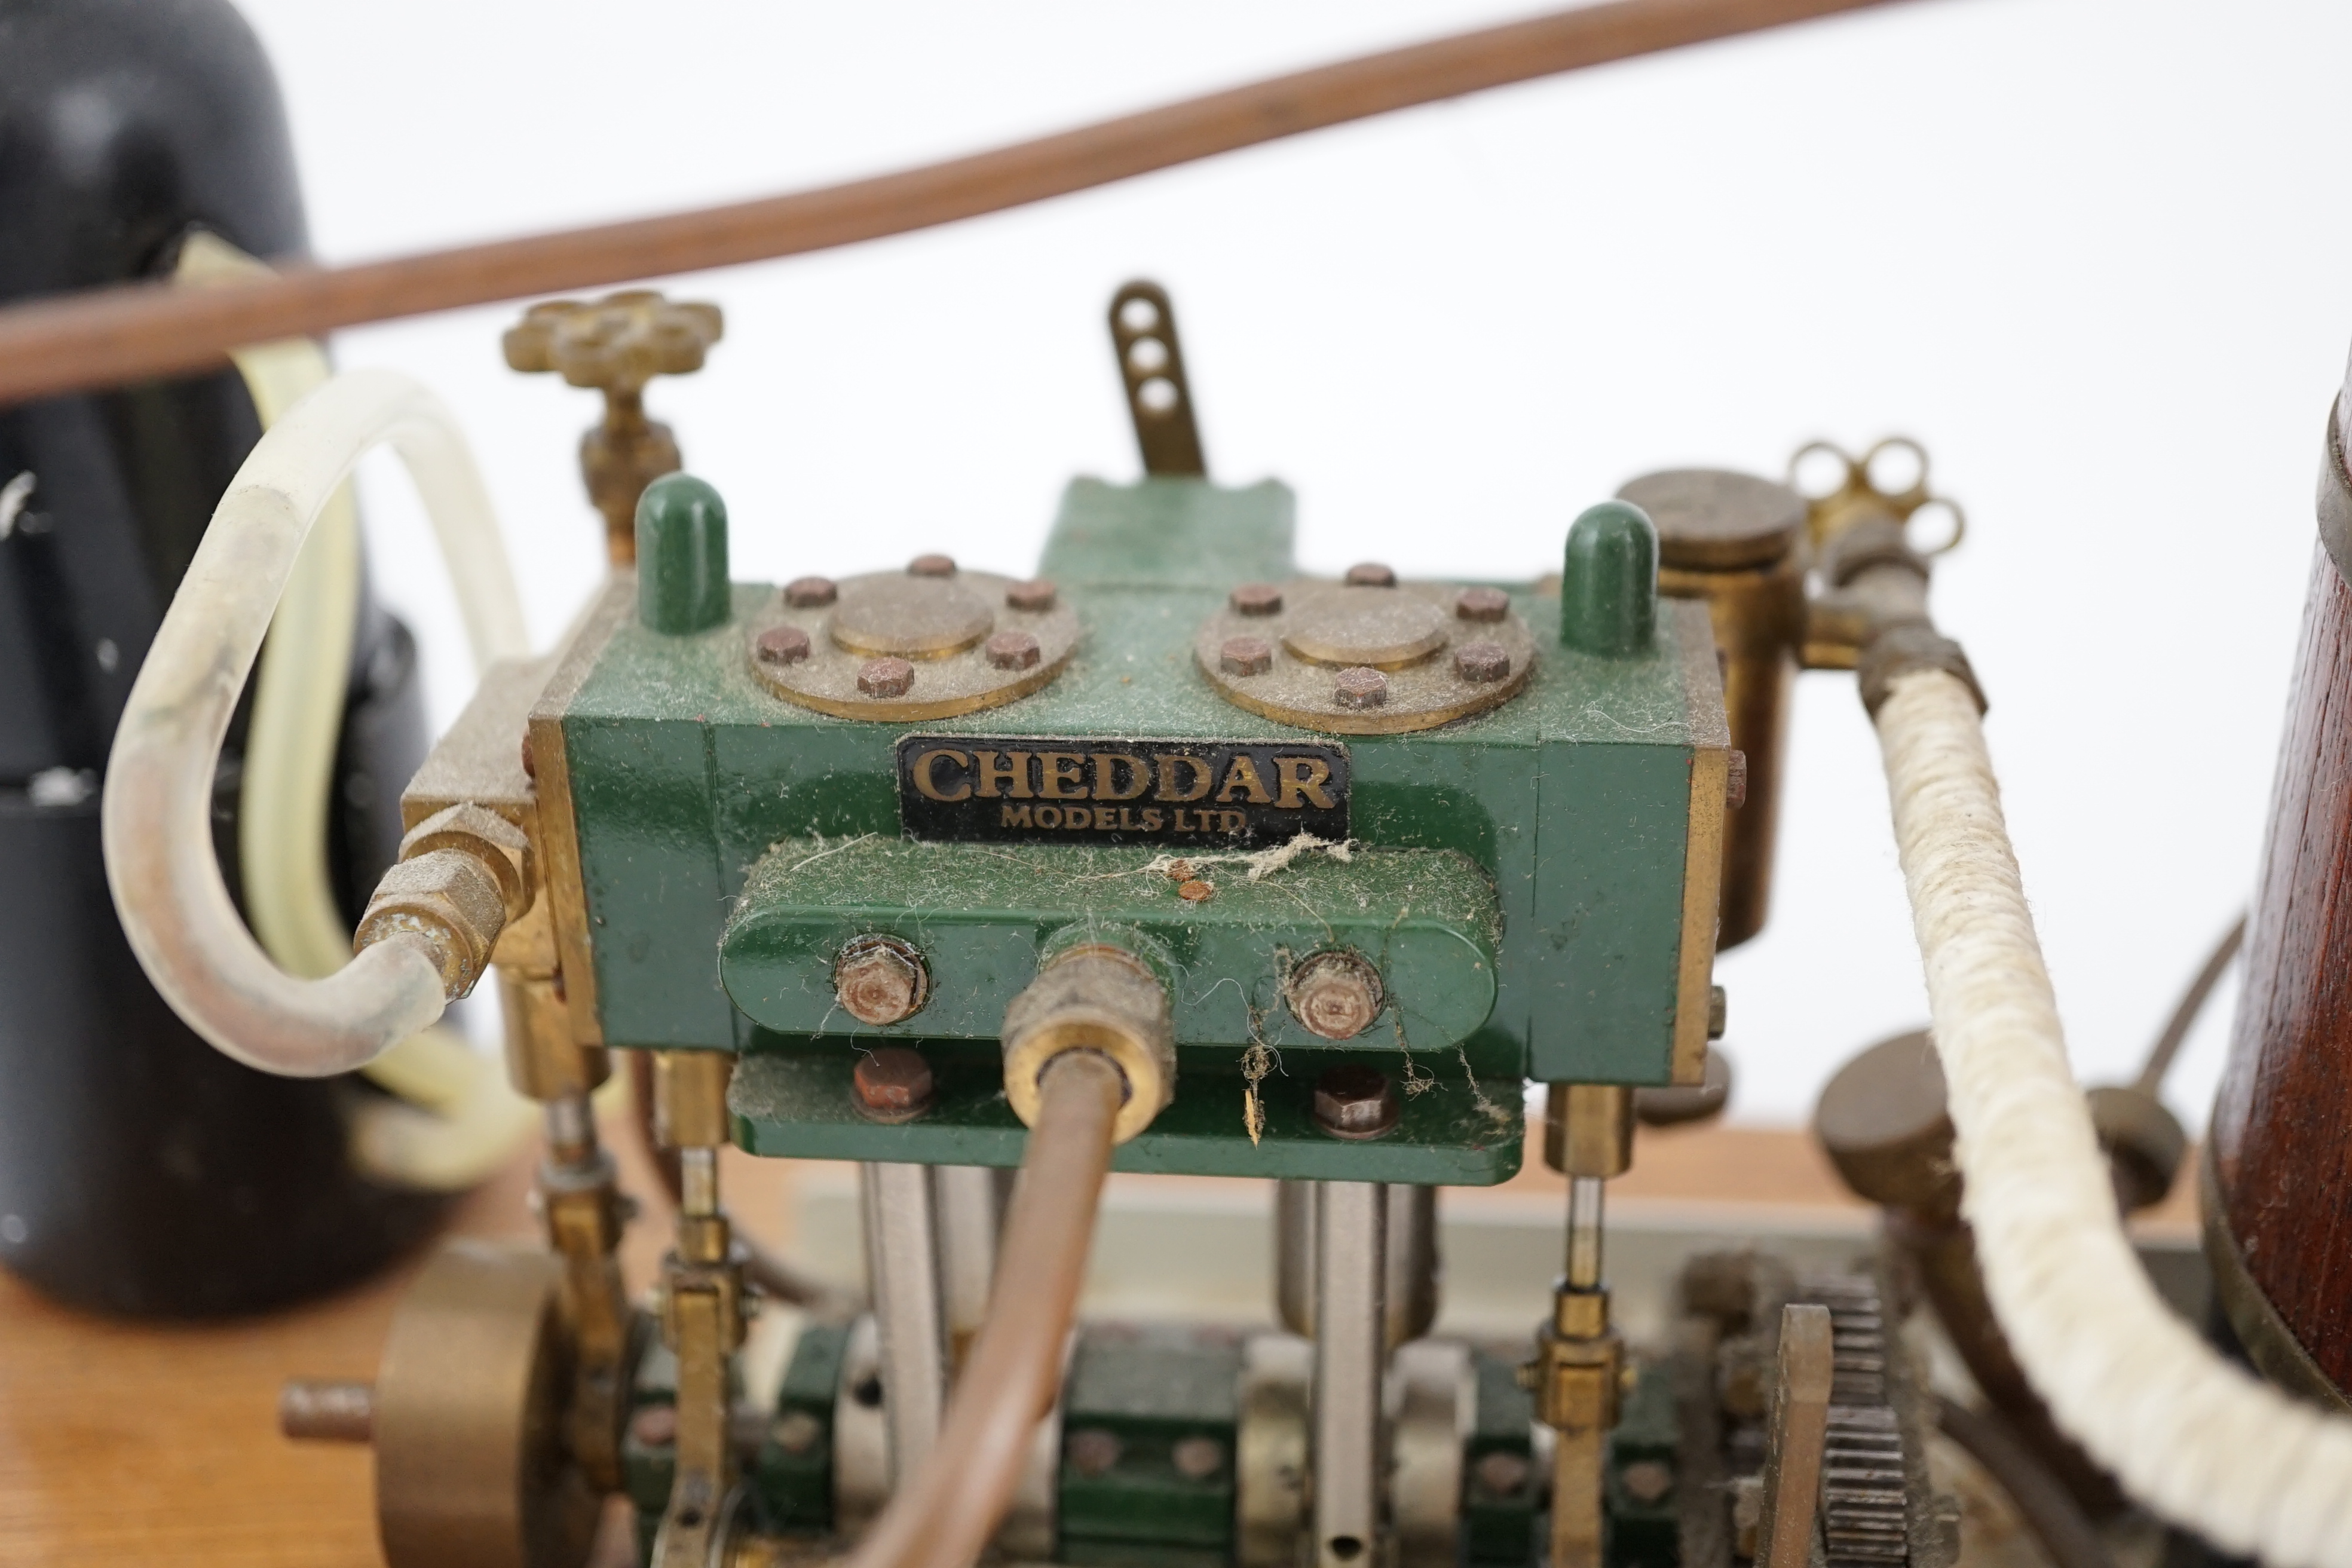 A Cheddar Models Ltd. Proteus steam plant, a gas fired vertical boiler two cylinder marine engine, - Image 3 of 8